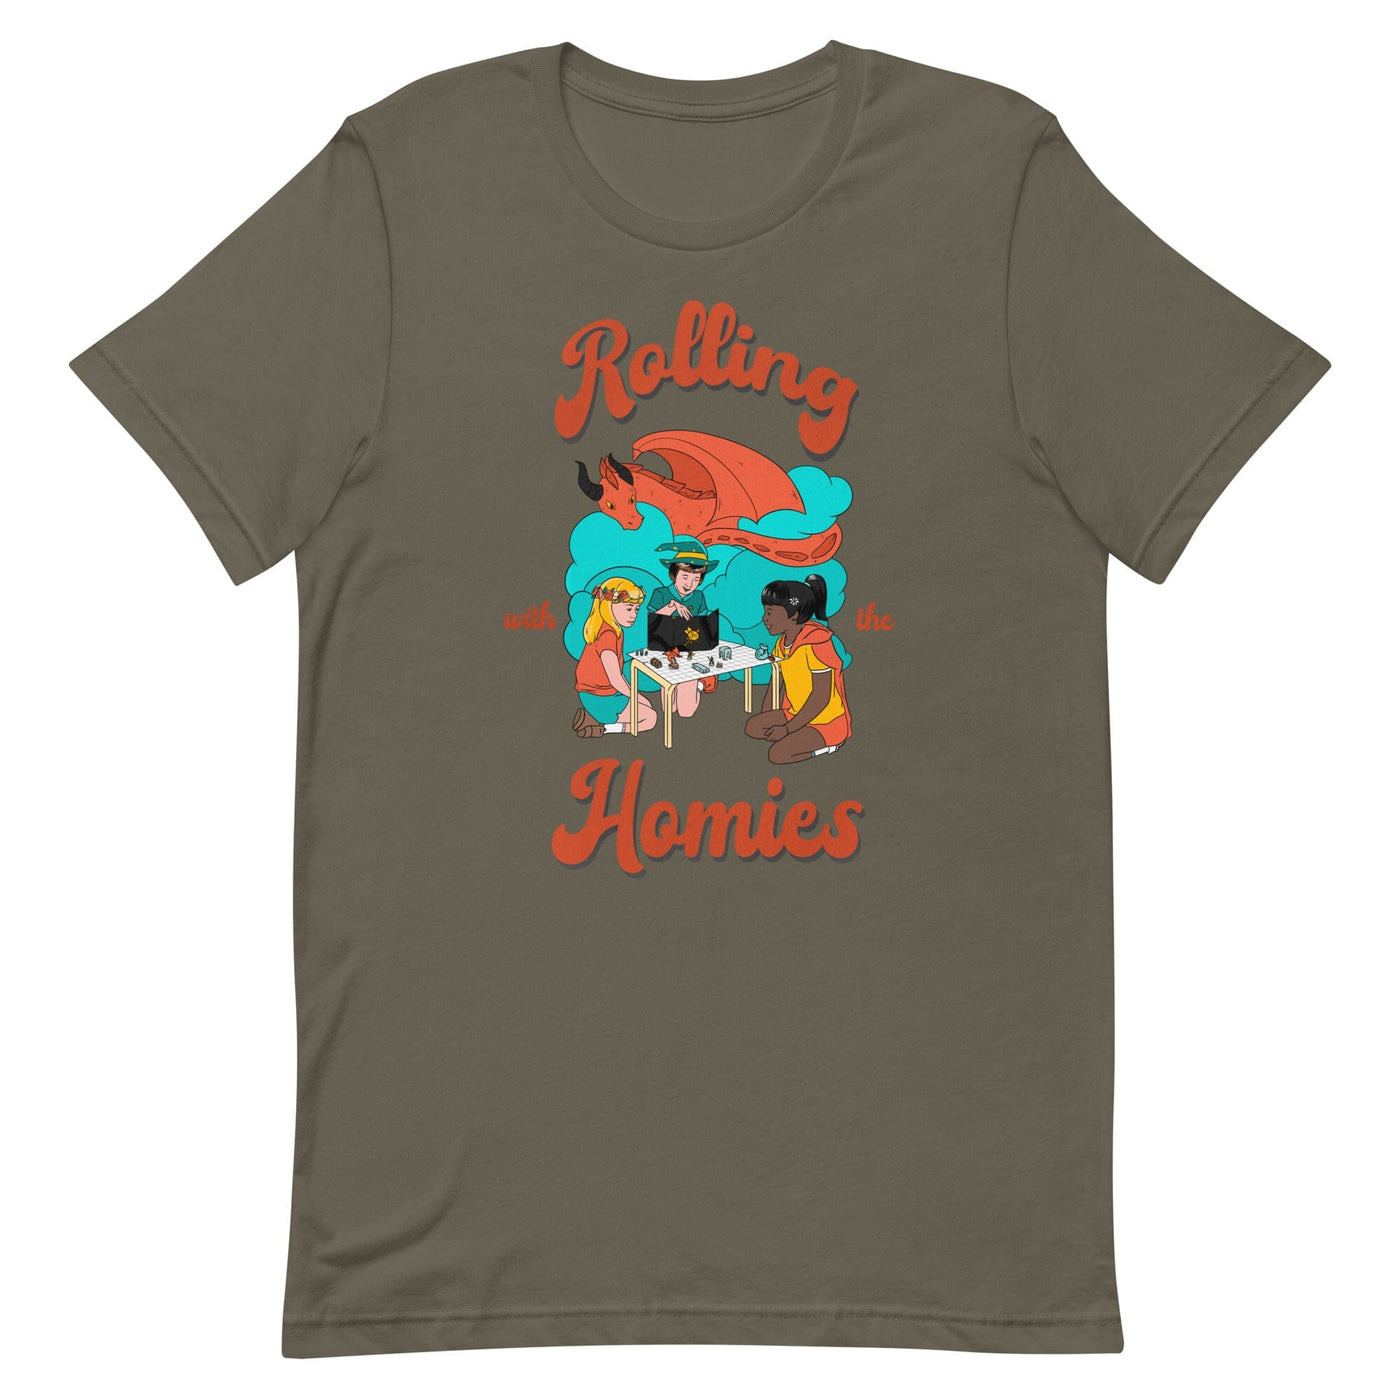 Rolling with the Homies | Unisex t-shirt | Retro Gaming Threads & Thistles Inventory Army S 